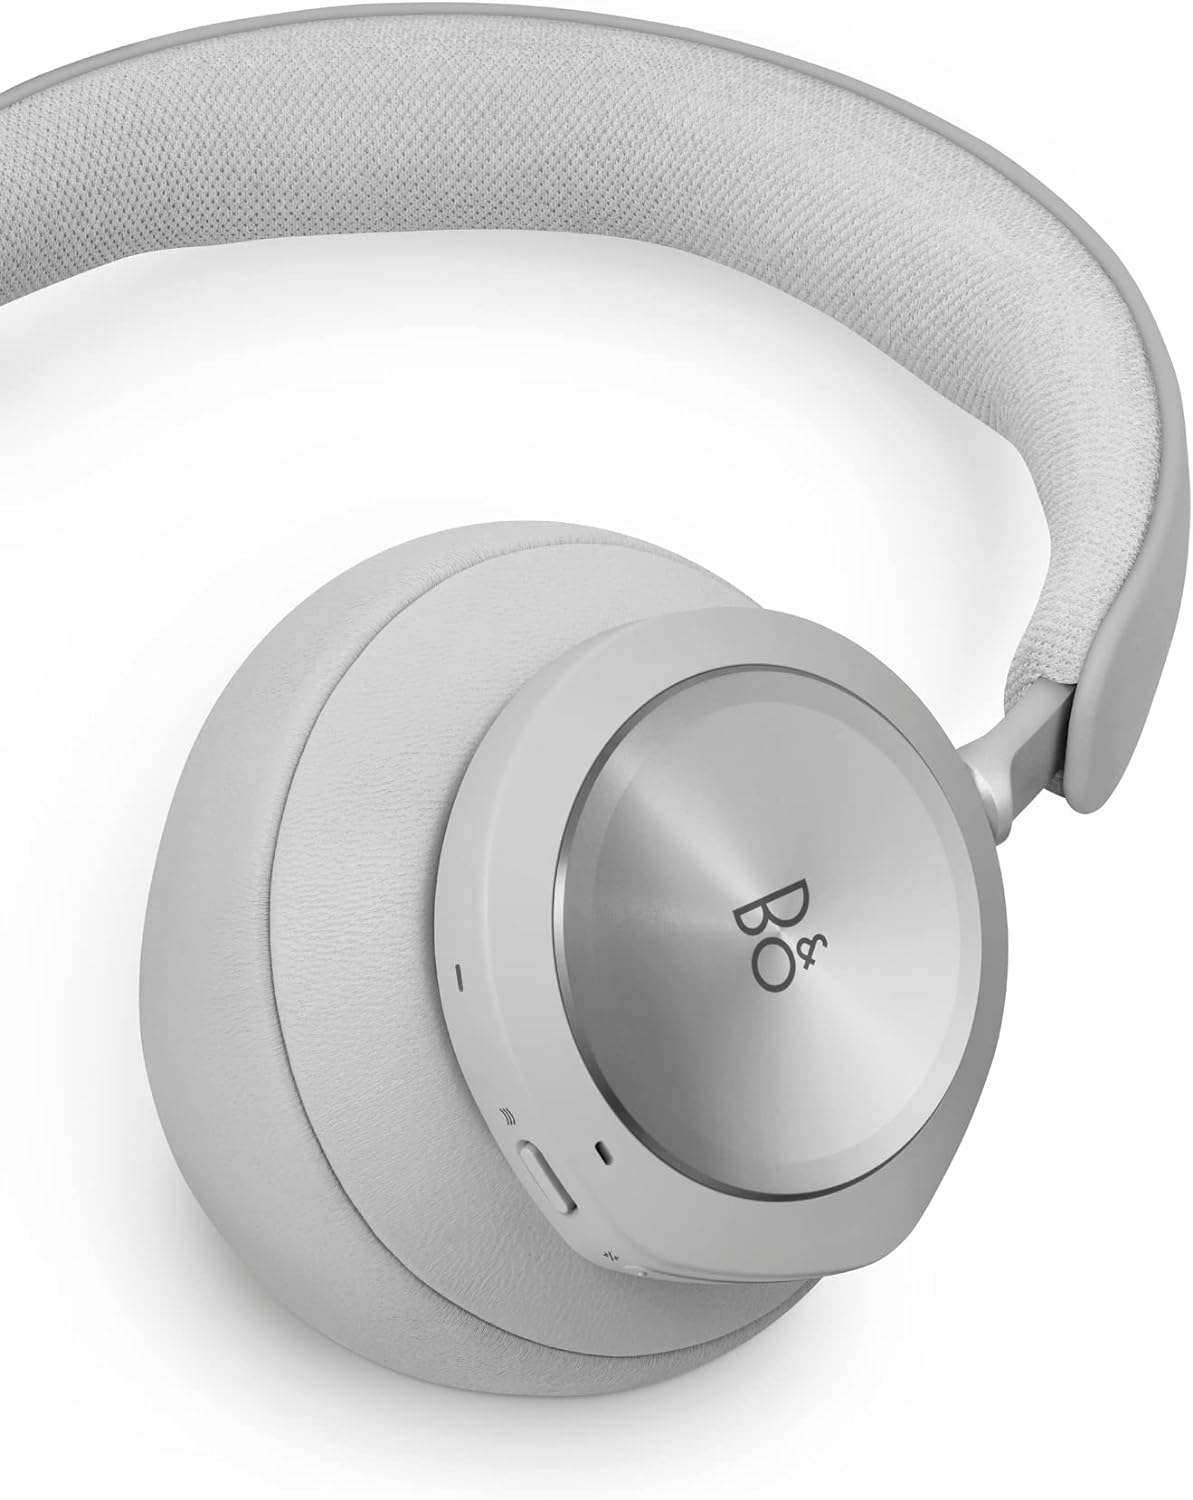 Bang & Olufsen Beoplay Portal Pc/Ps - Wireless Bluetooth Gaming Over-Ear Headphones With Active Noise Cancelling And Microphone For Pc And Playstation, Grey Mist, One Size